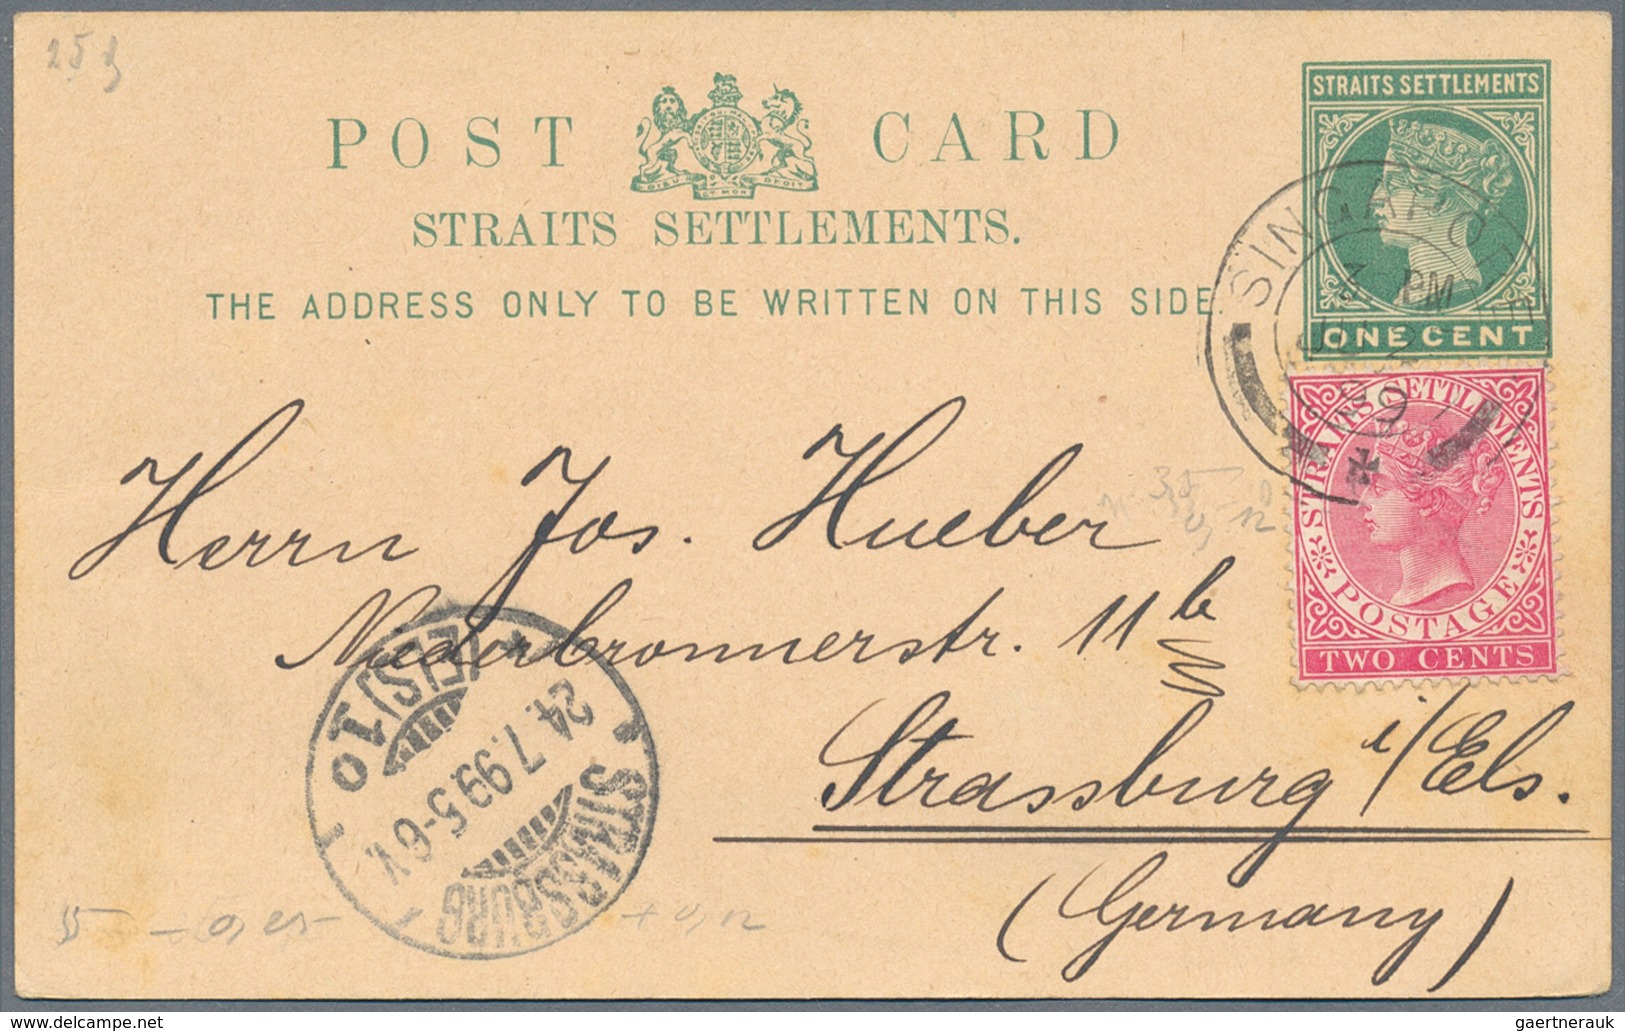 Singapur: 1887/1936, covers (7+1 front) inc. airmail to Germany on HAL envelope, 1915 censored to Is